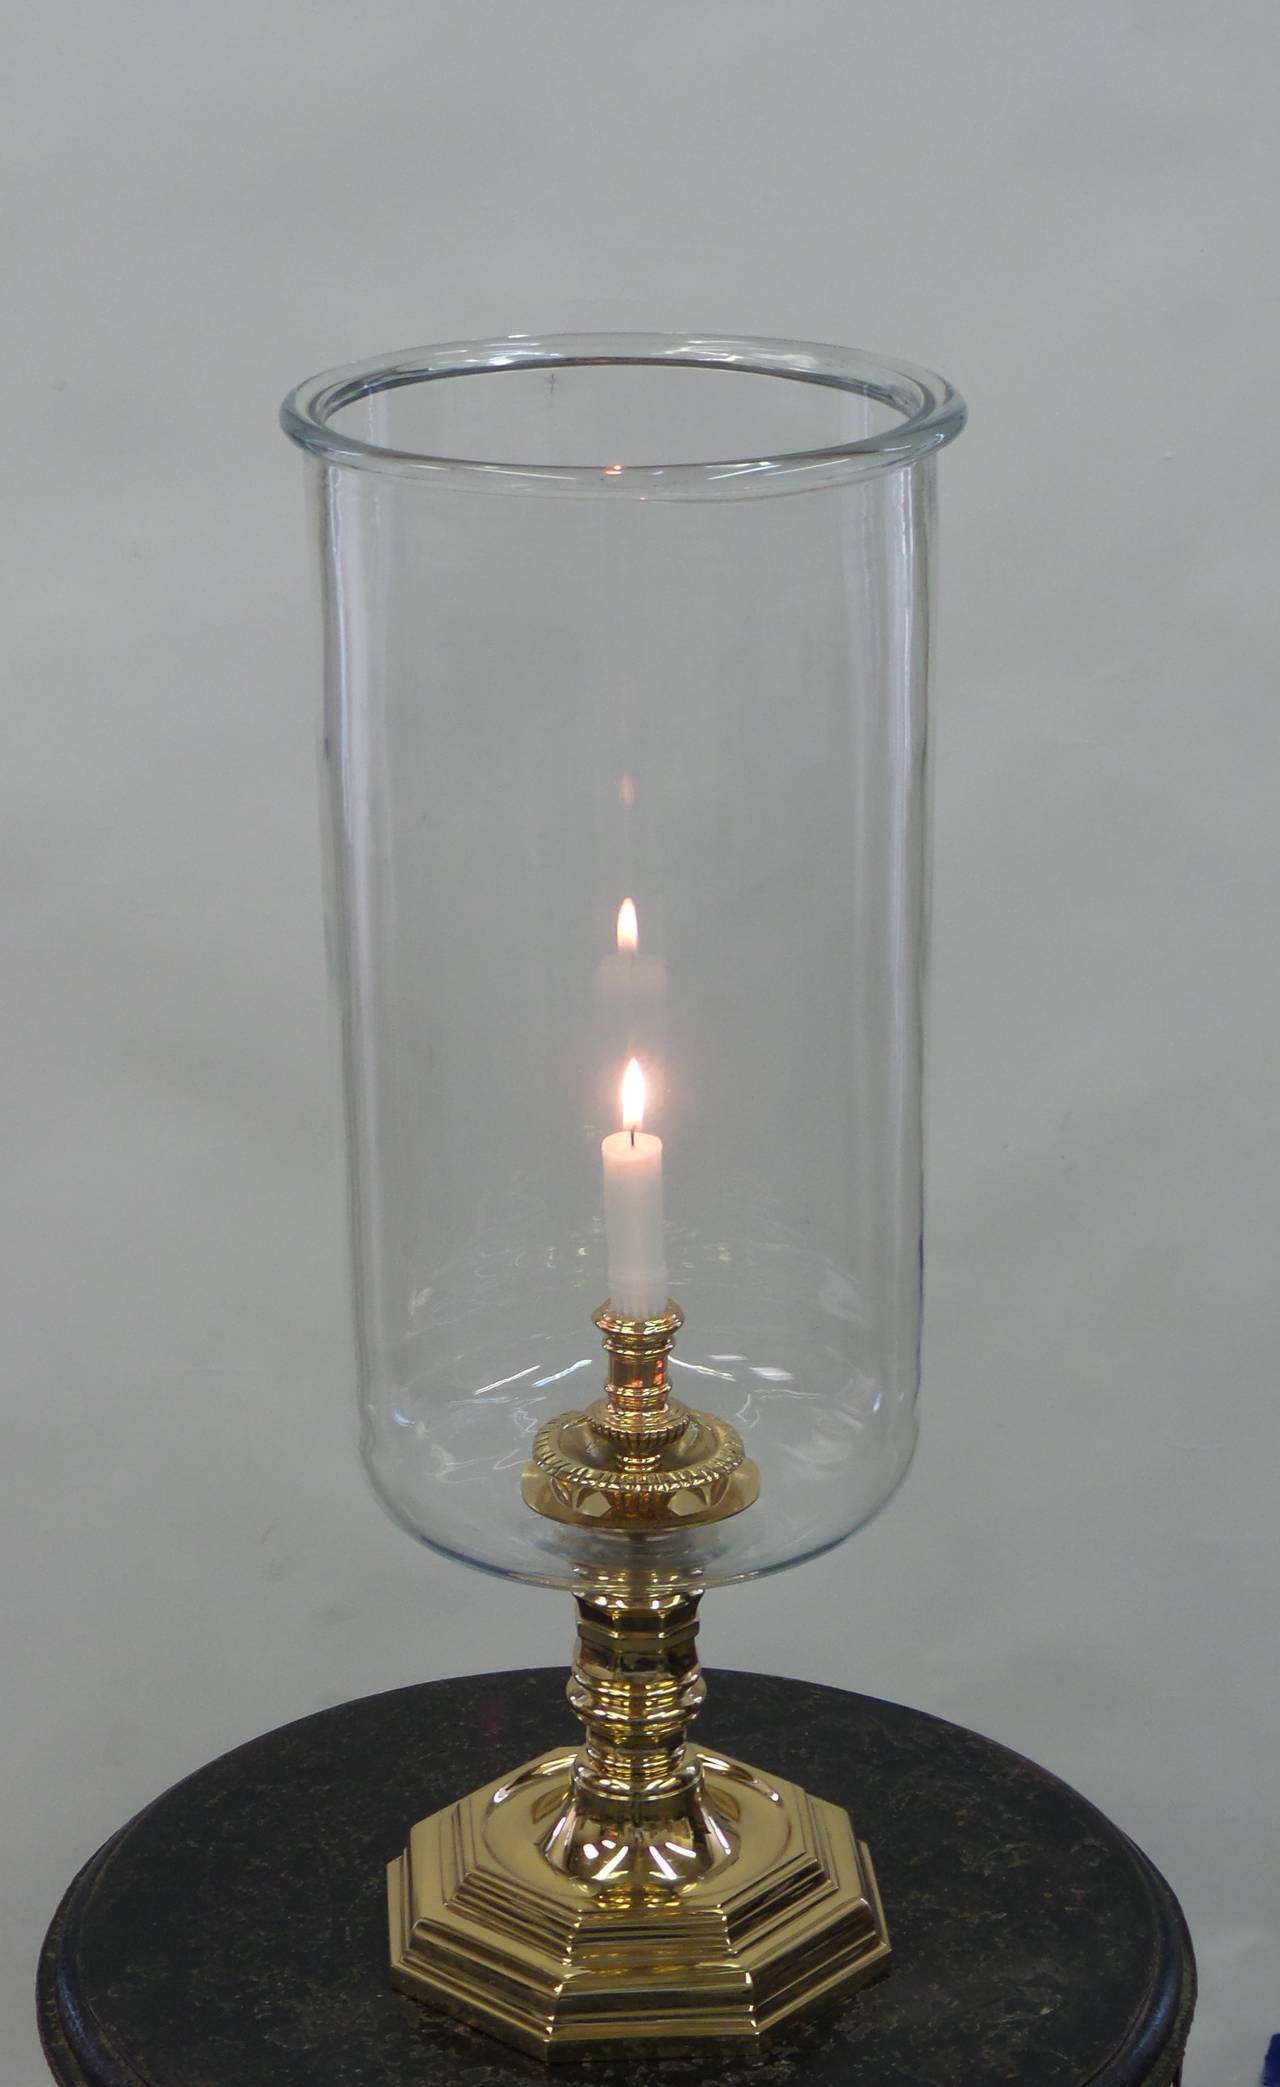 A Louis XIV style hurricane lamp with a polished brass base and handblown glass shade with a rolled edges. Please allow for up-to 2 weeks lead-time as well as for slight variations in dimensions due to each shade being handblown.